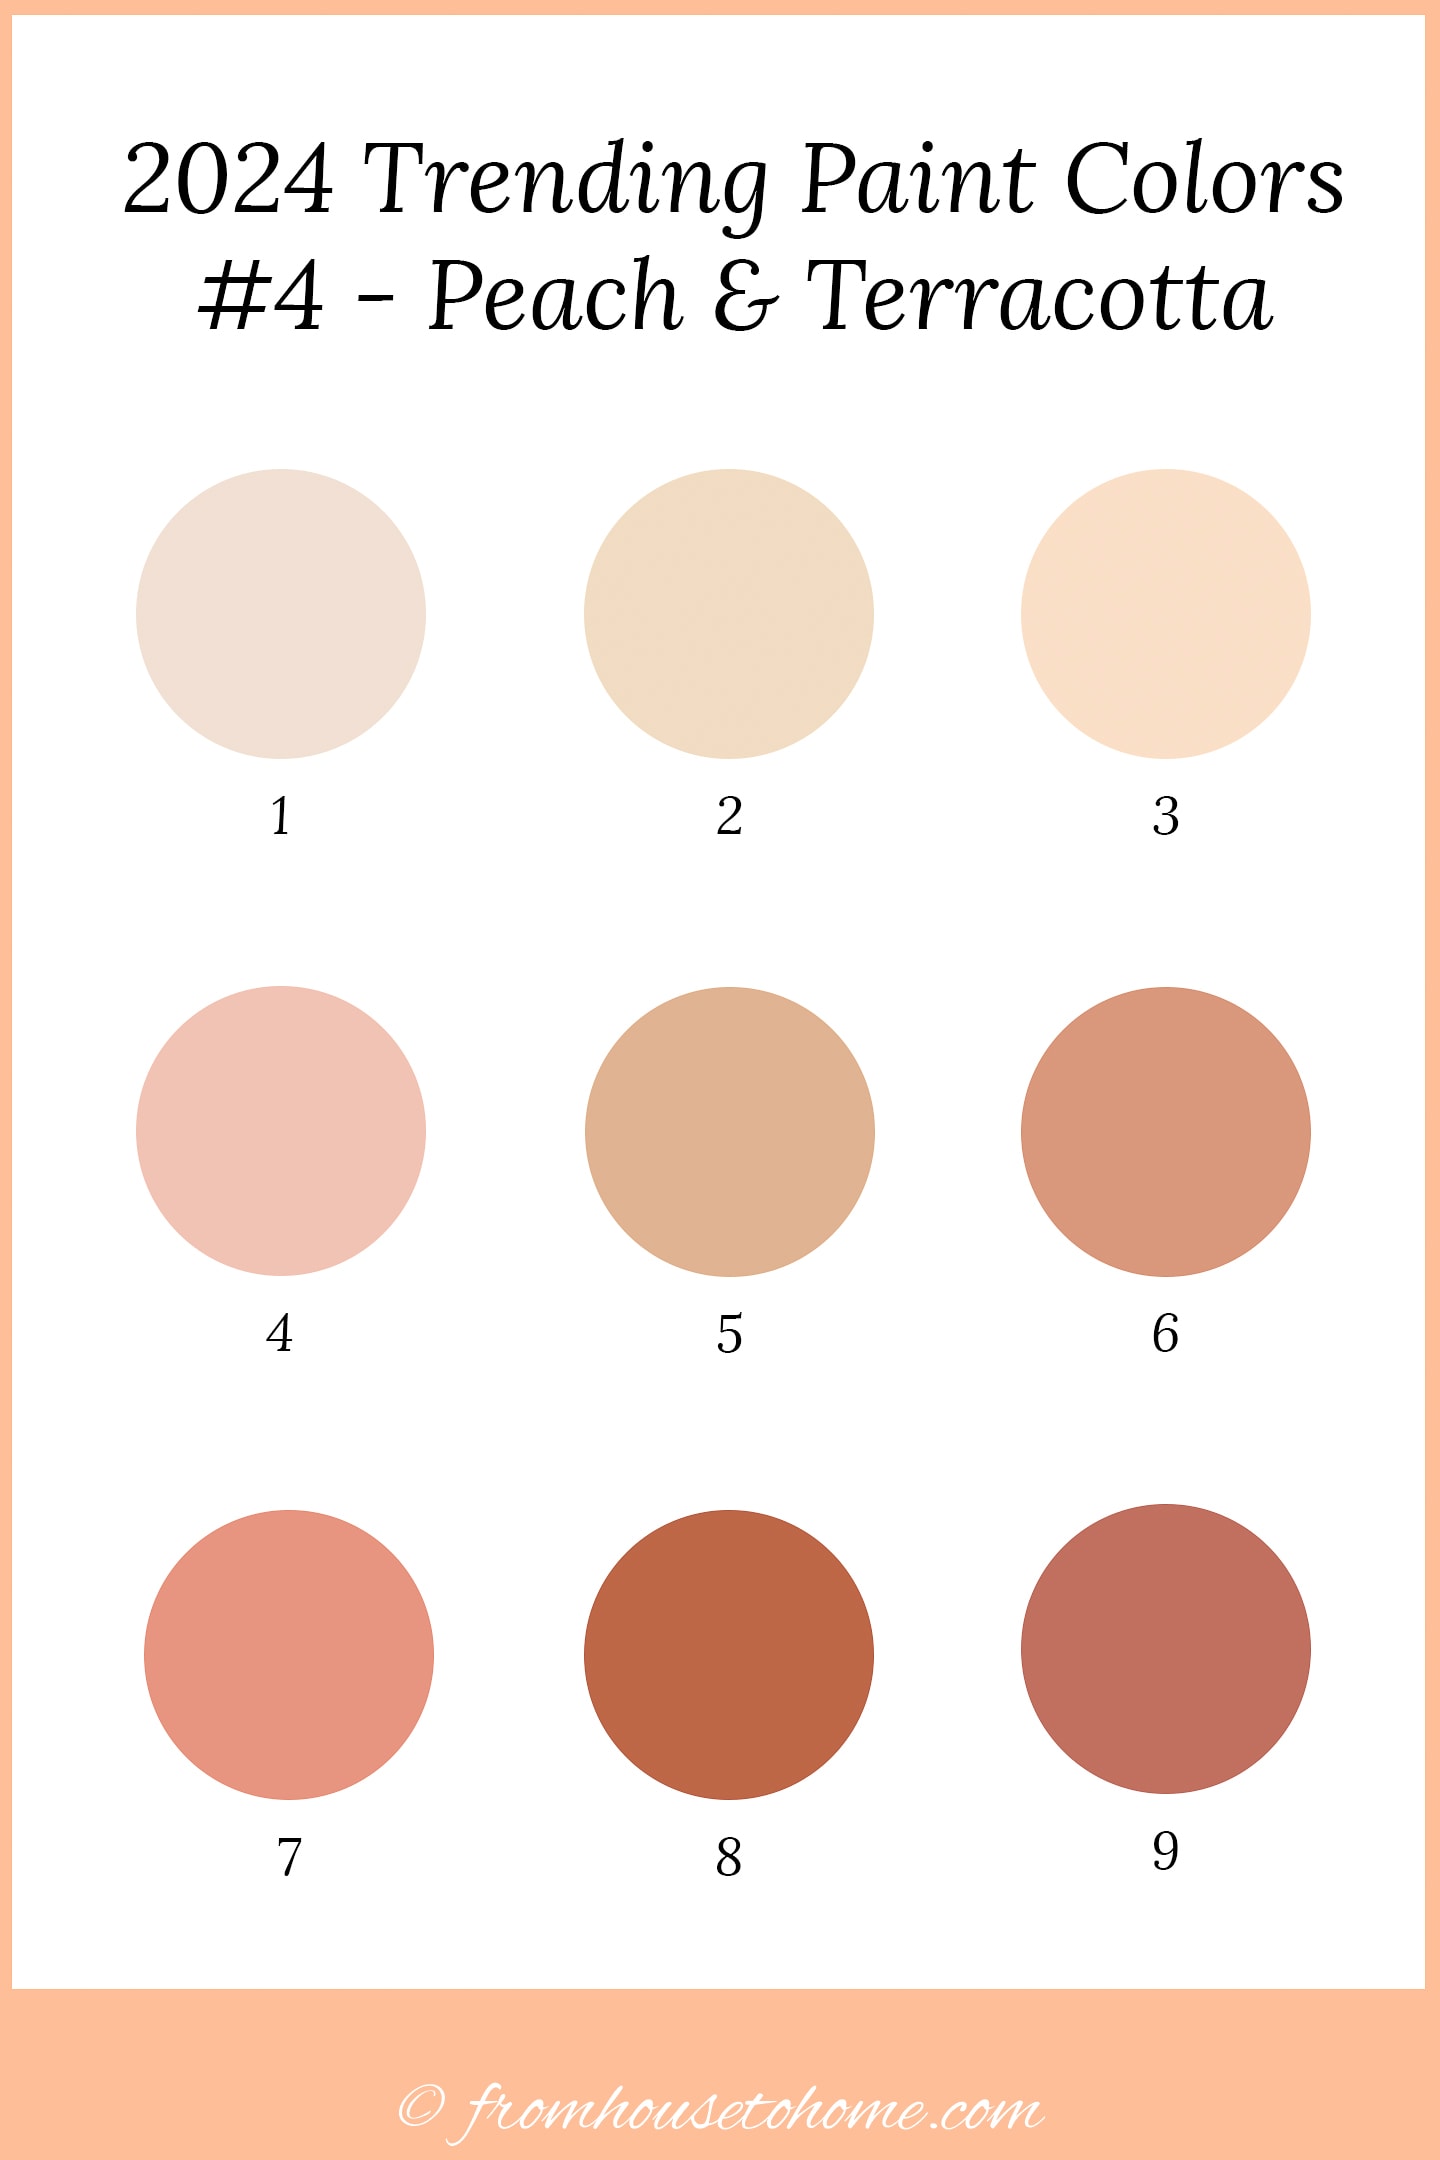 9 paint colors that are part of the peach and terracotta paint color trend for 2024